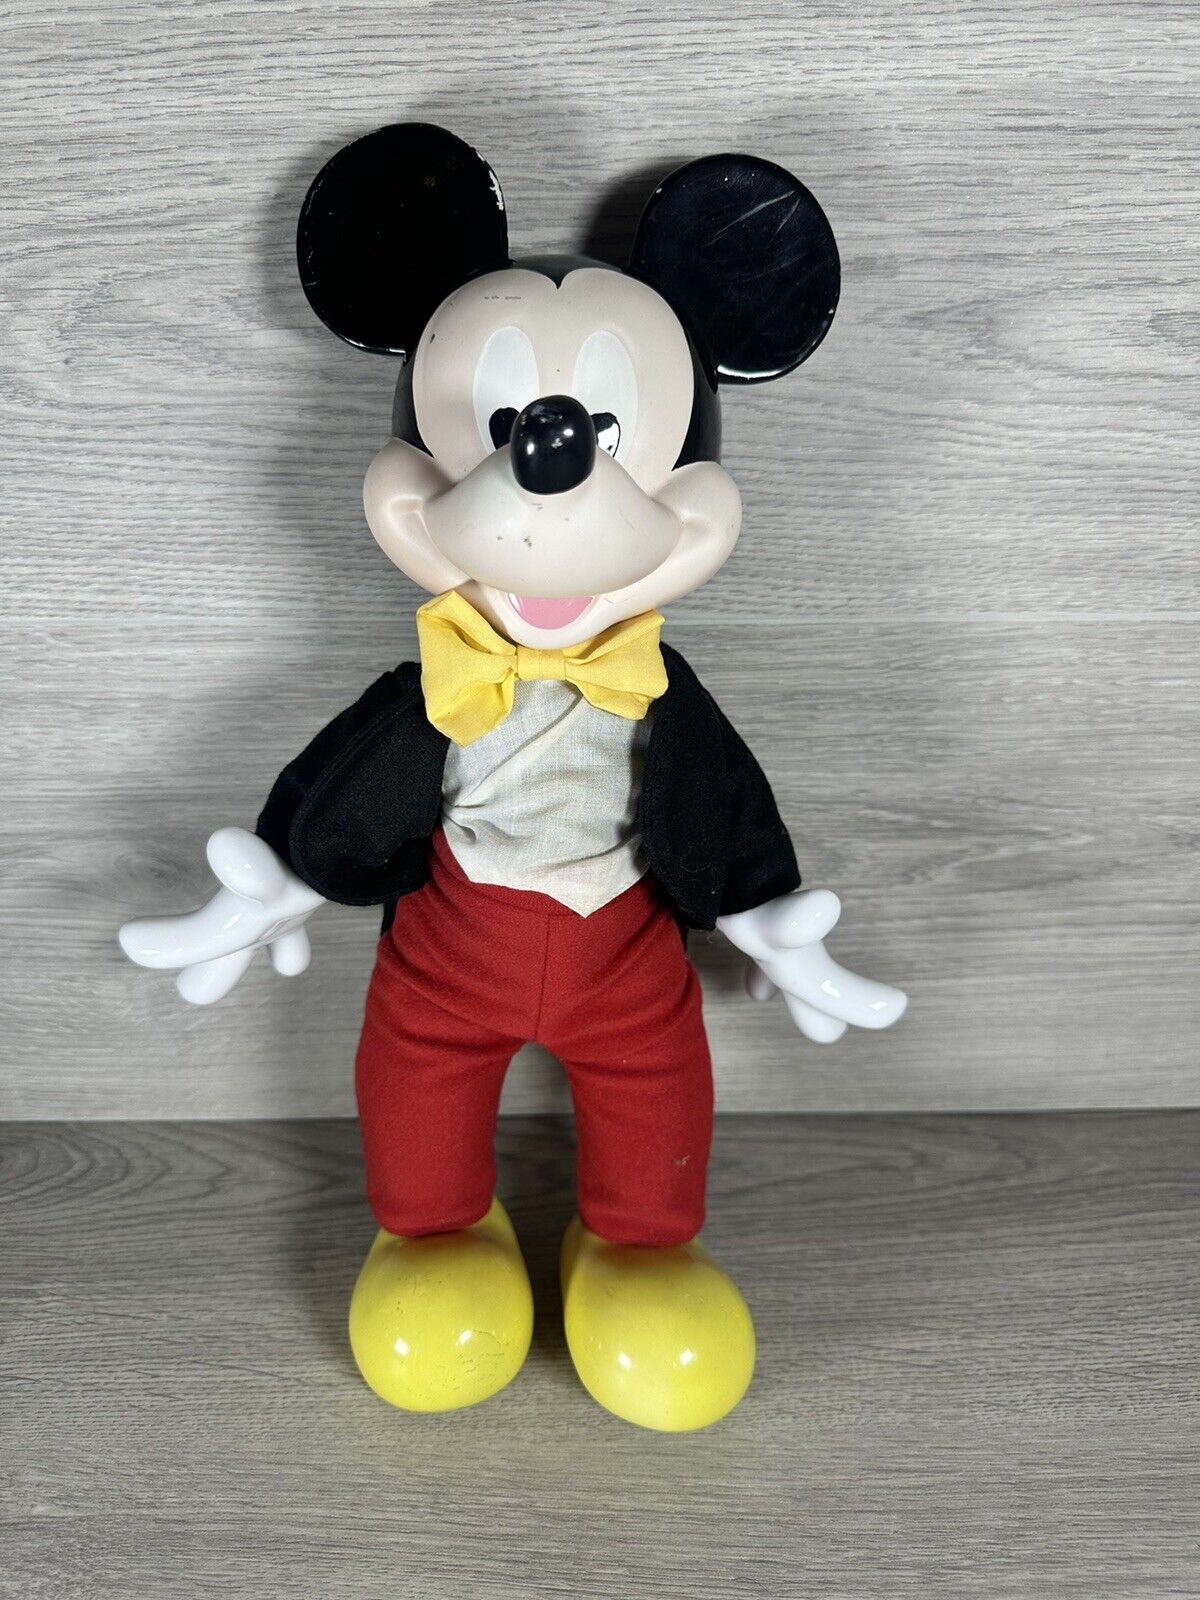 Vintage Disney Mickey Mouse Hand Painted Porcelain Doll “ See Description “